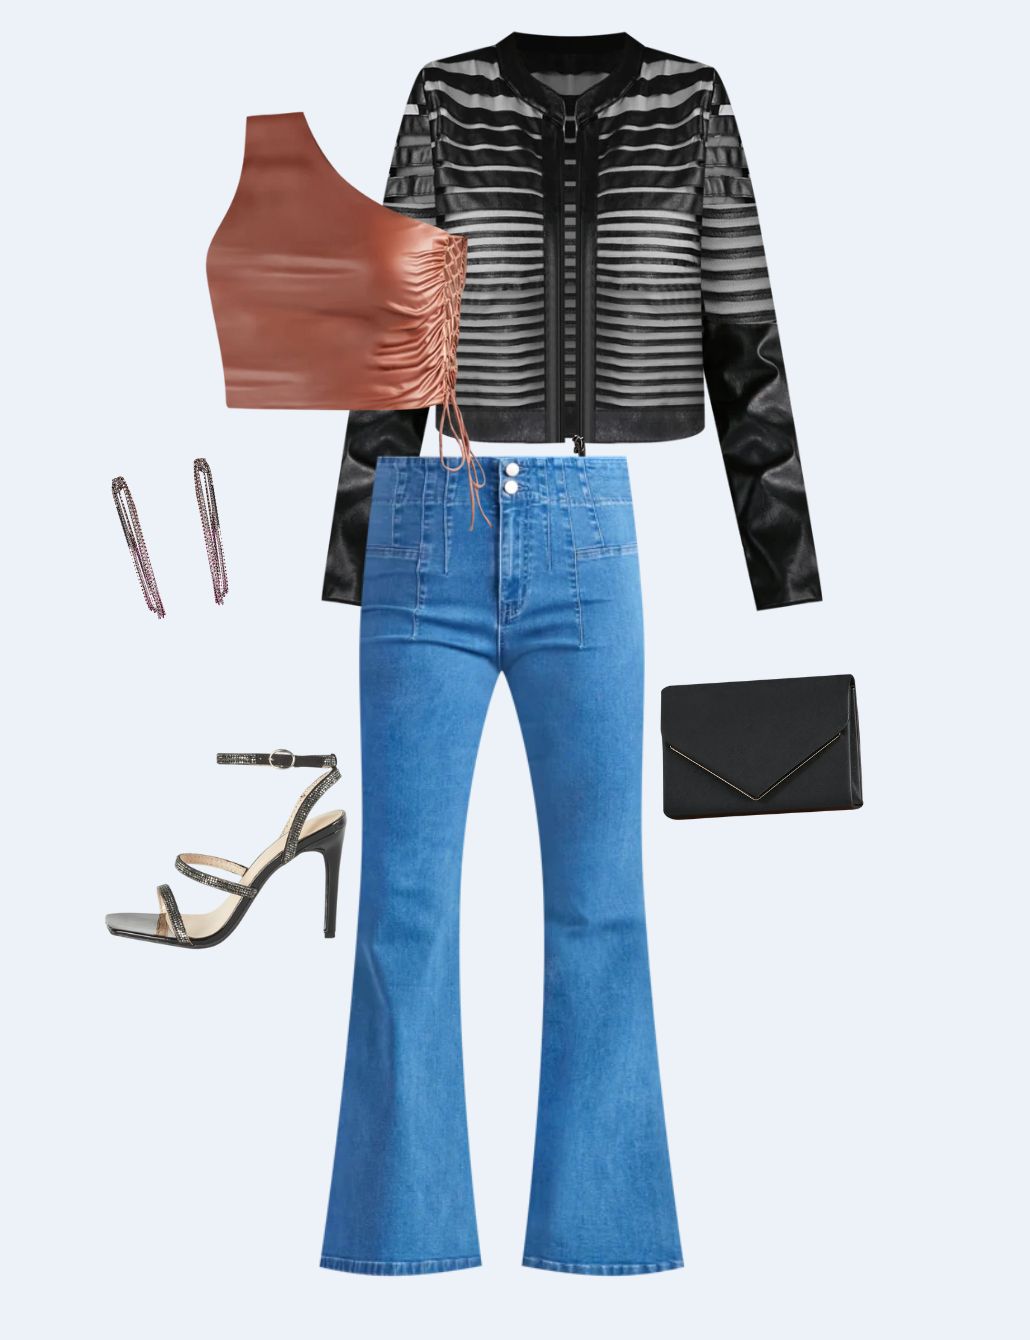 Jeans And Heels: Ways To Wear This Classic Combination, 40% OFF